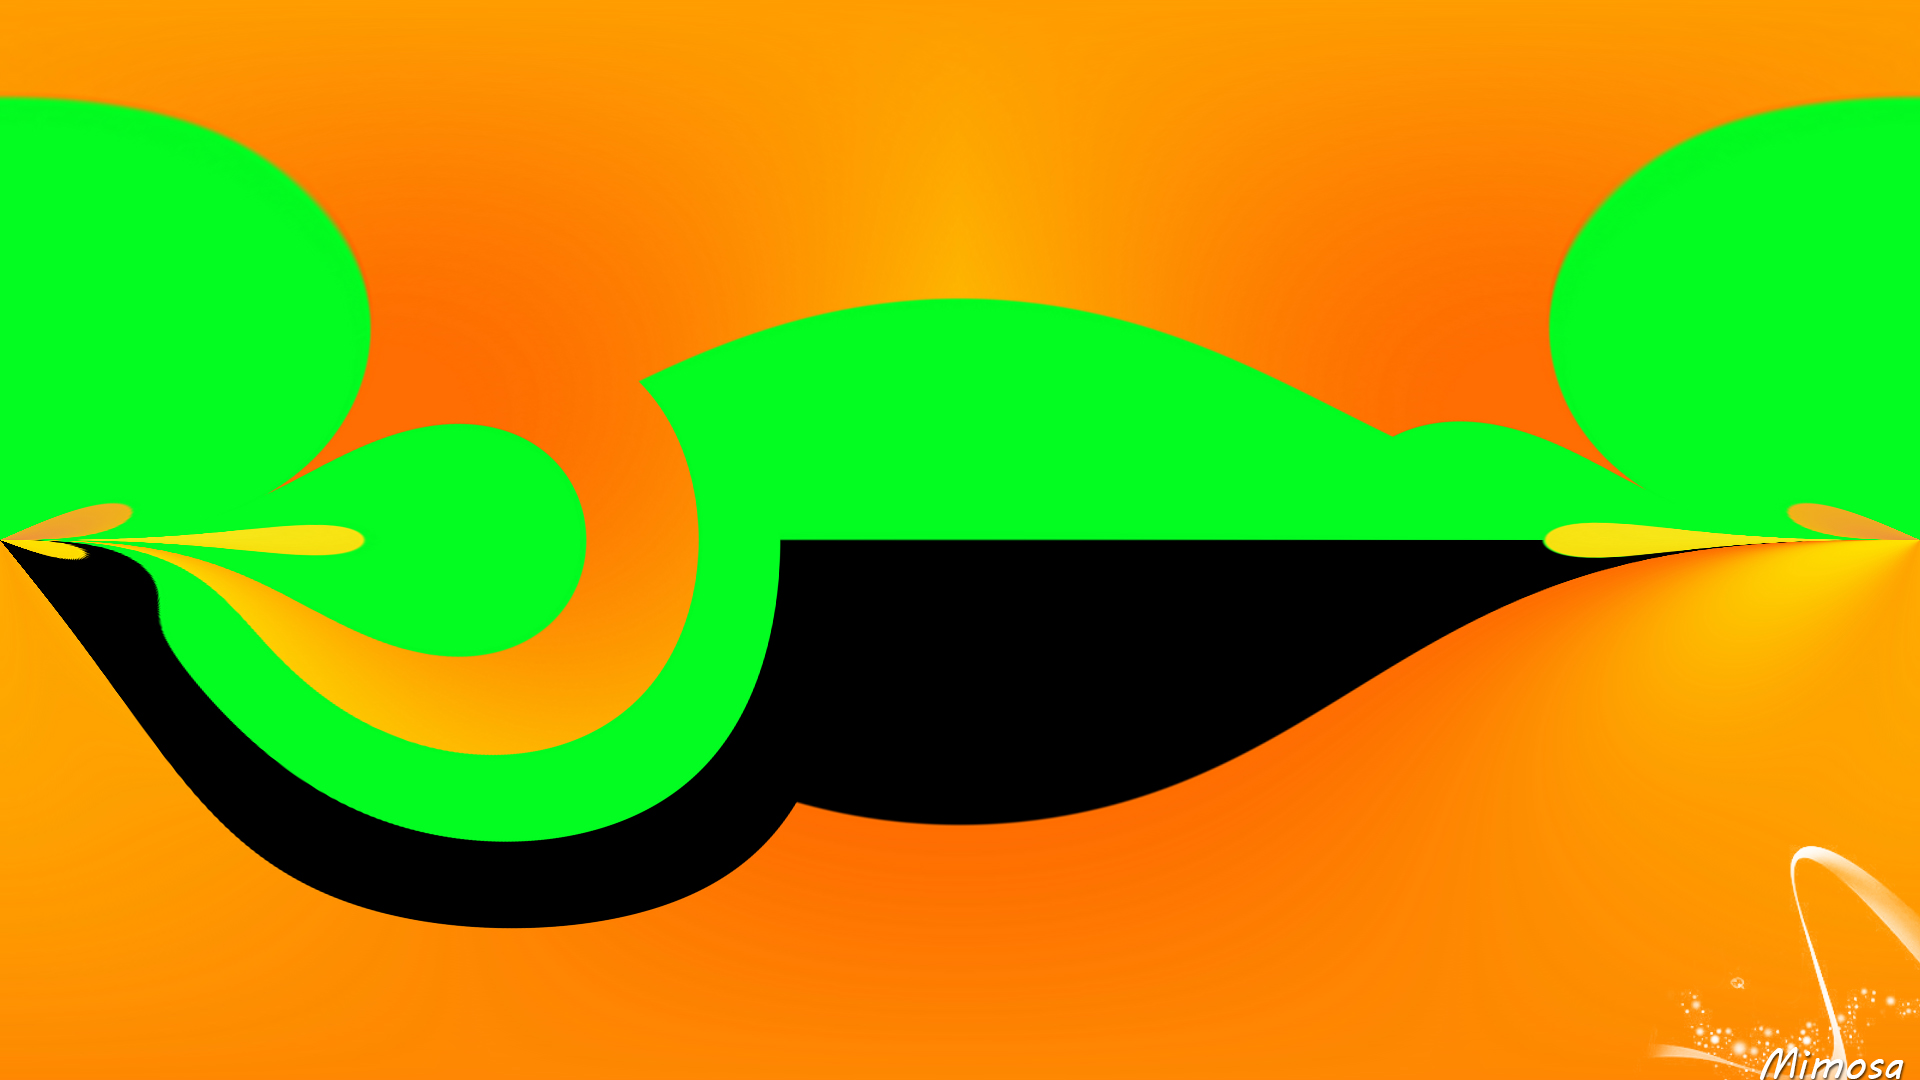 Abstract Artistic Colorful Digital Art Green Shapes Orange Color 1920x1080